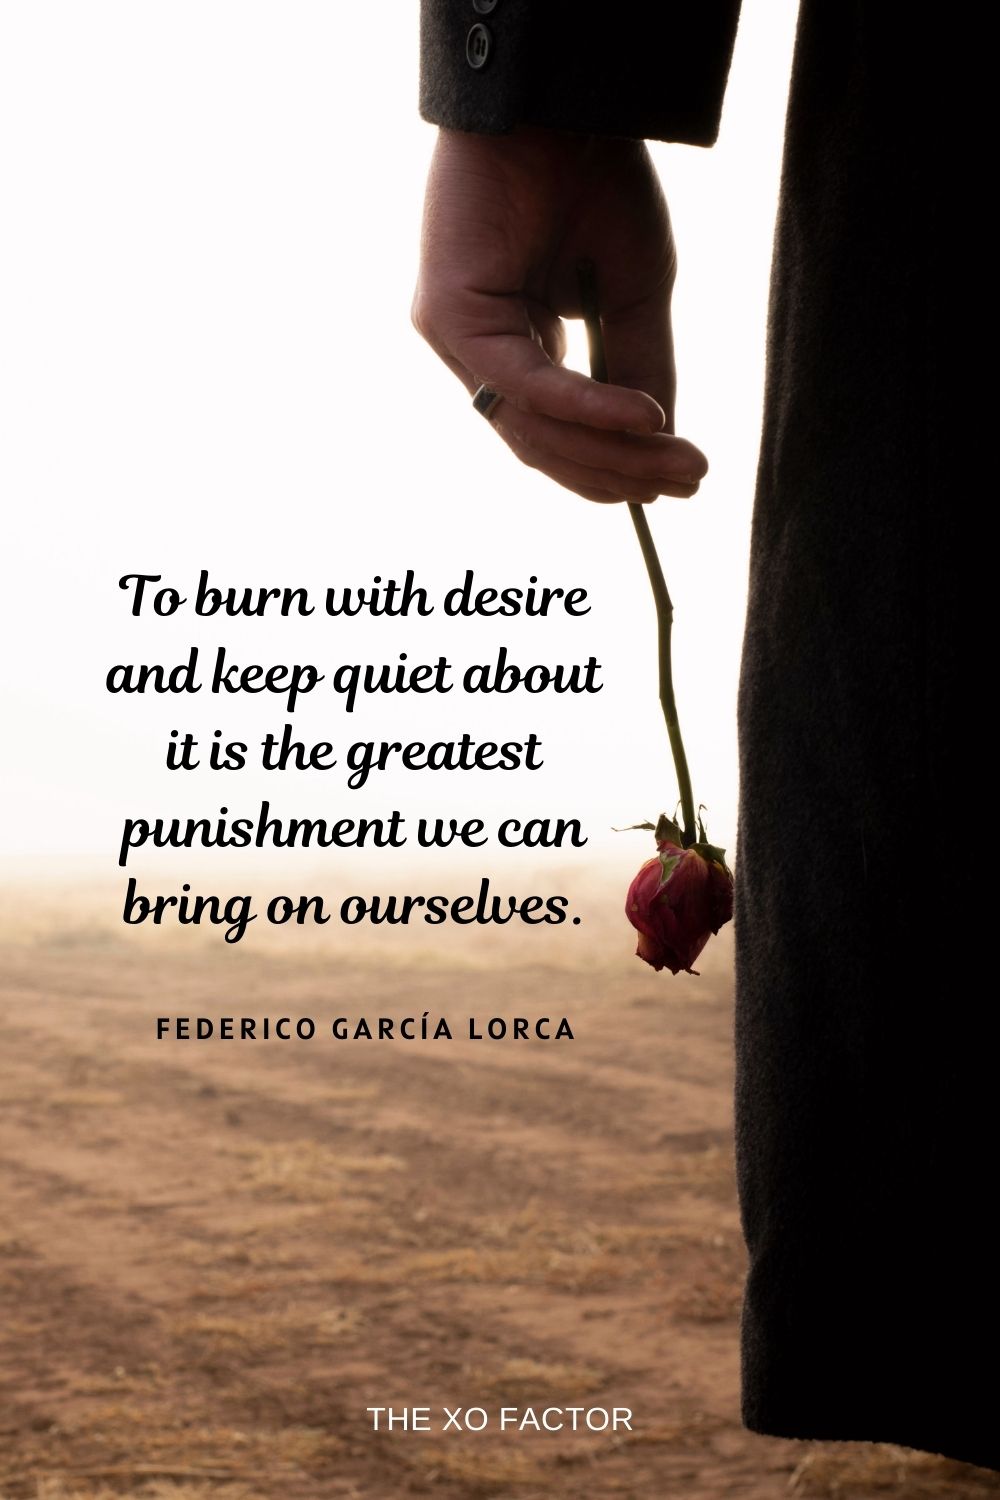 To burn with desire and keep quiet about it is the greatest punishment we can bring on ourselves. Federico García Lorca